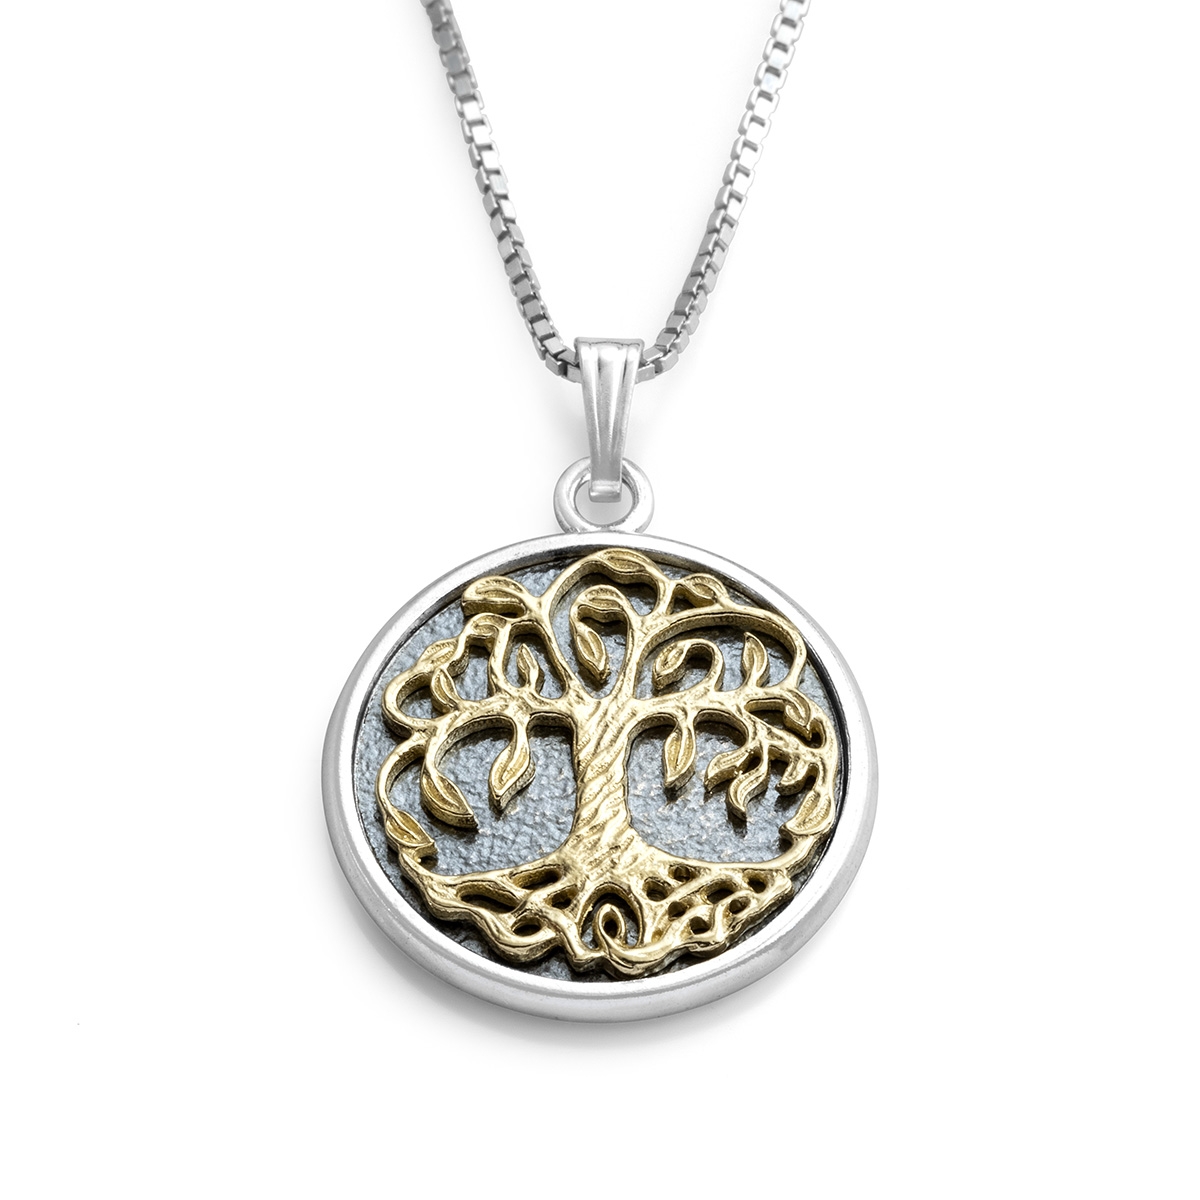 Rafael Jewelry Handcrafted 925 Sterling Silver Tree of Life Design Pendant Necklace With 14K Yellow Gold - 1